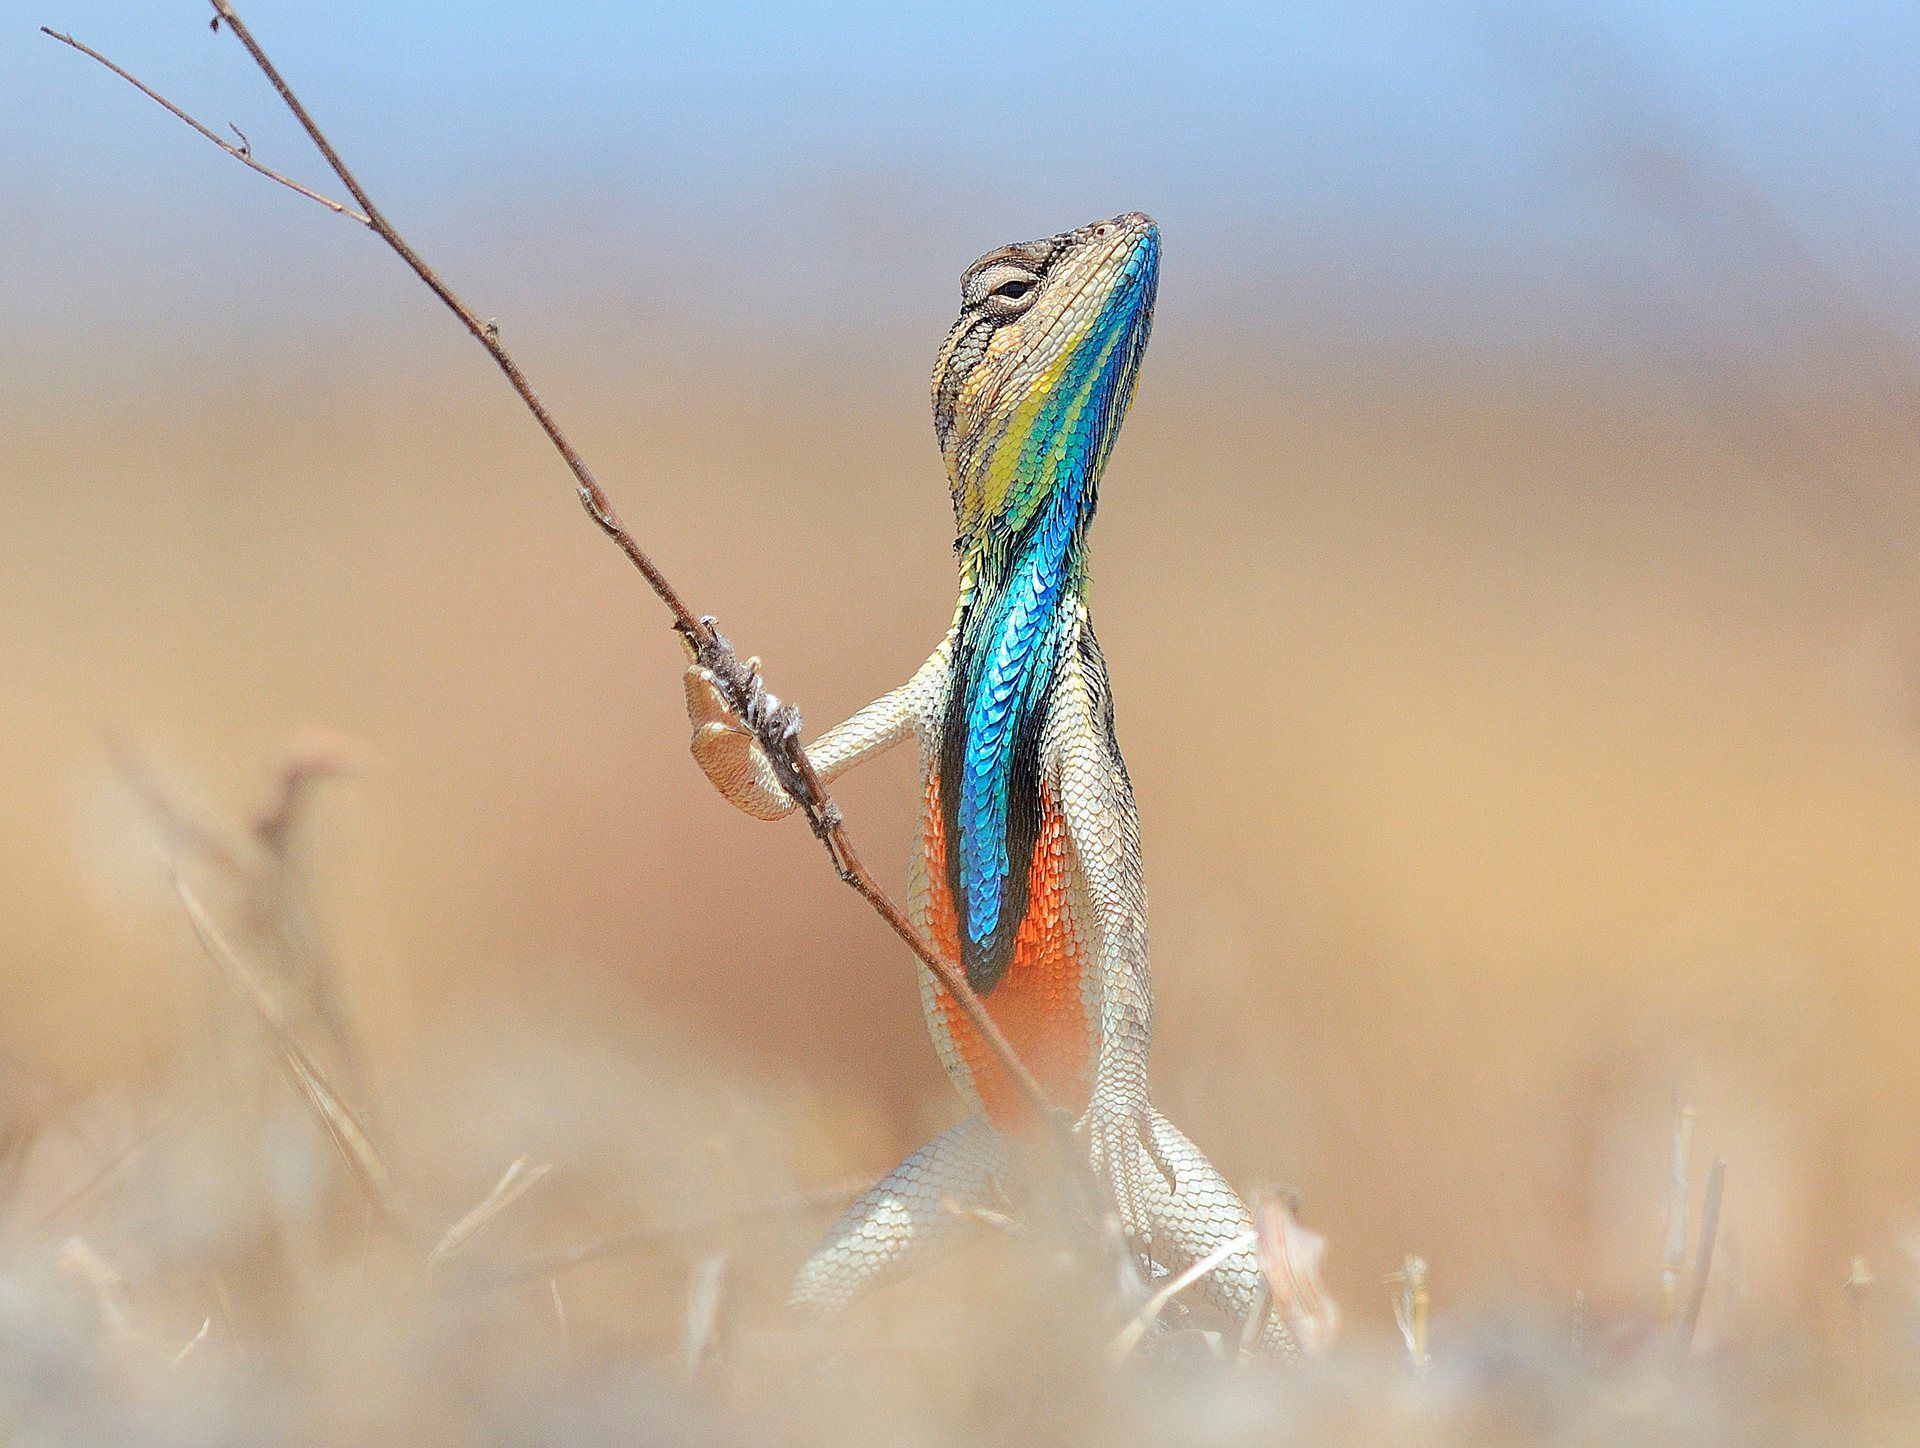 PsBattle: Colorful lizard holding a twig